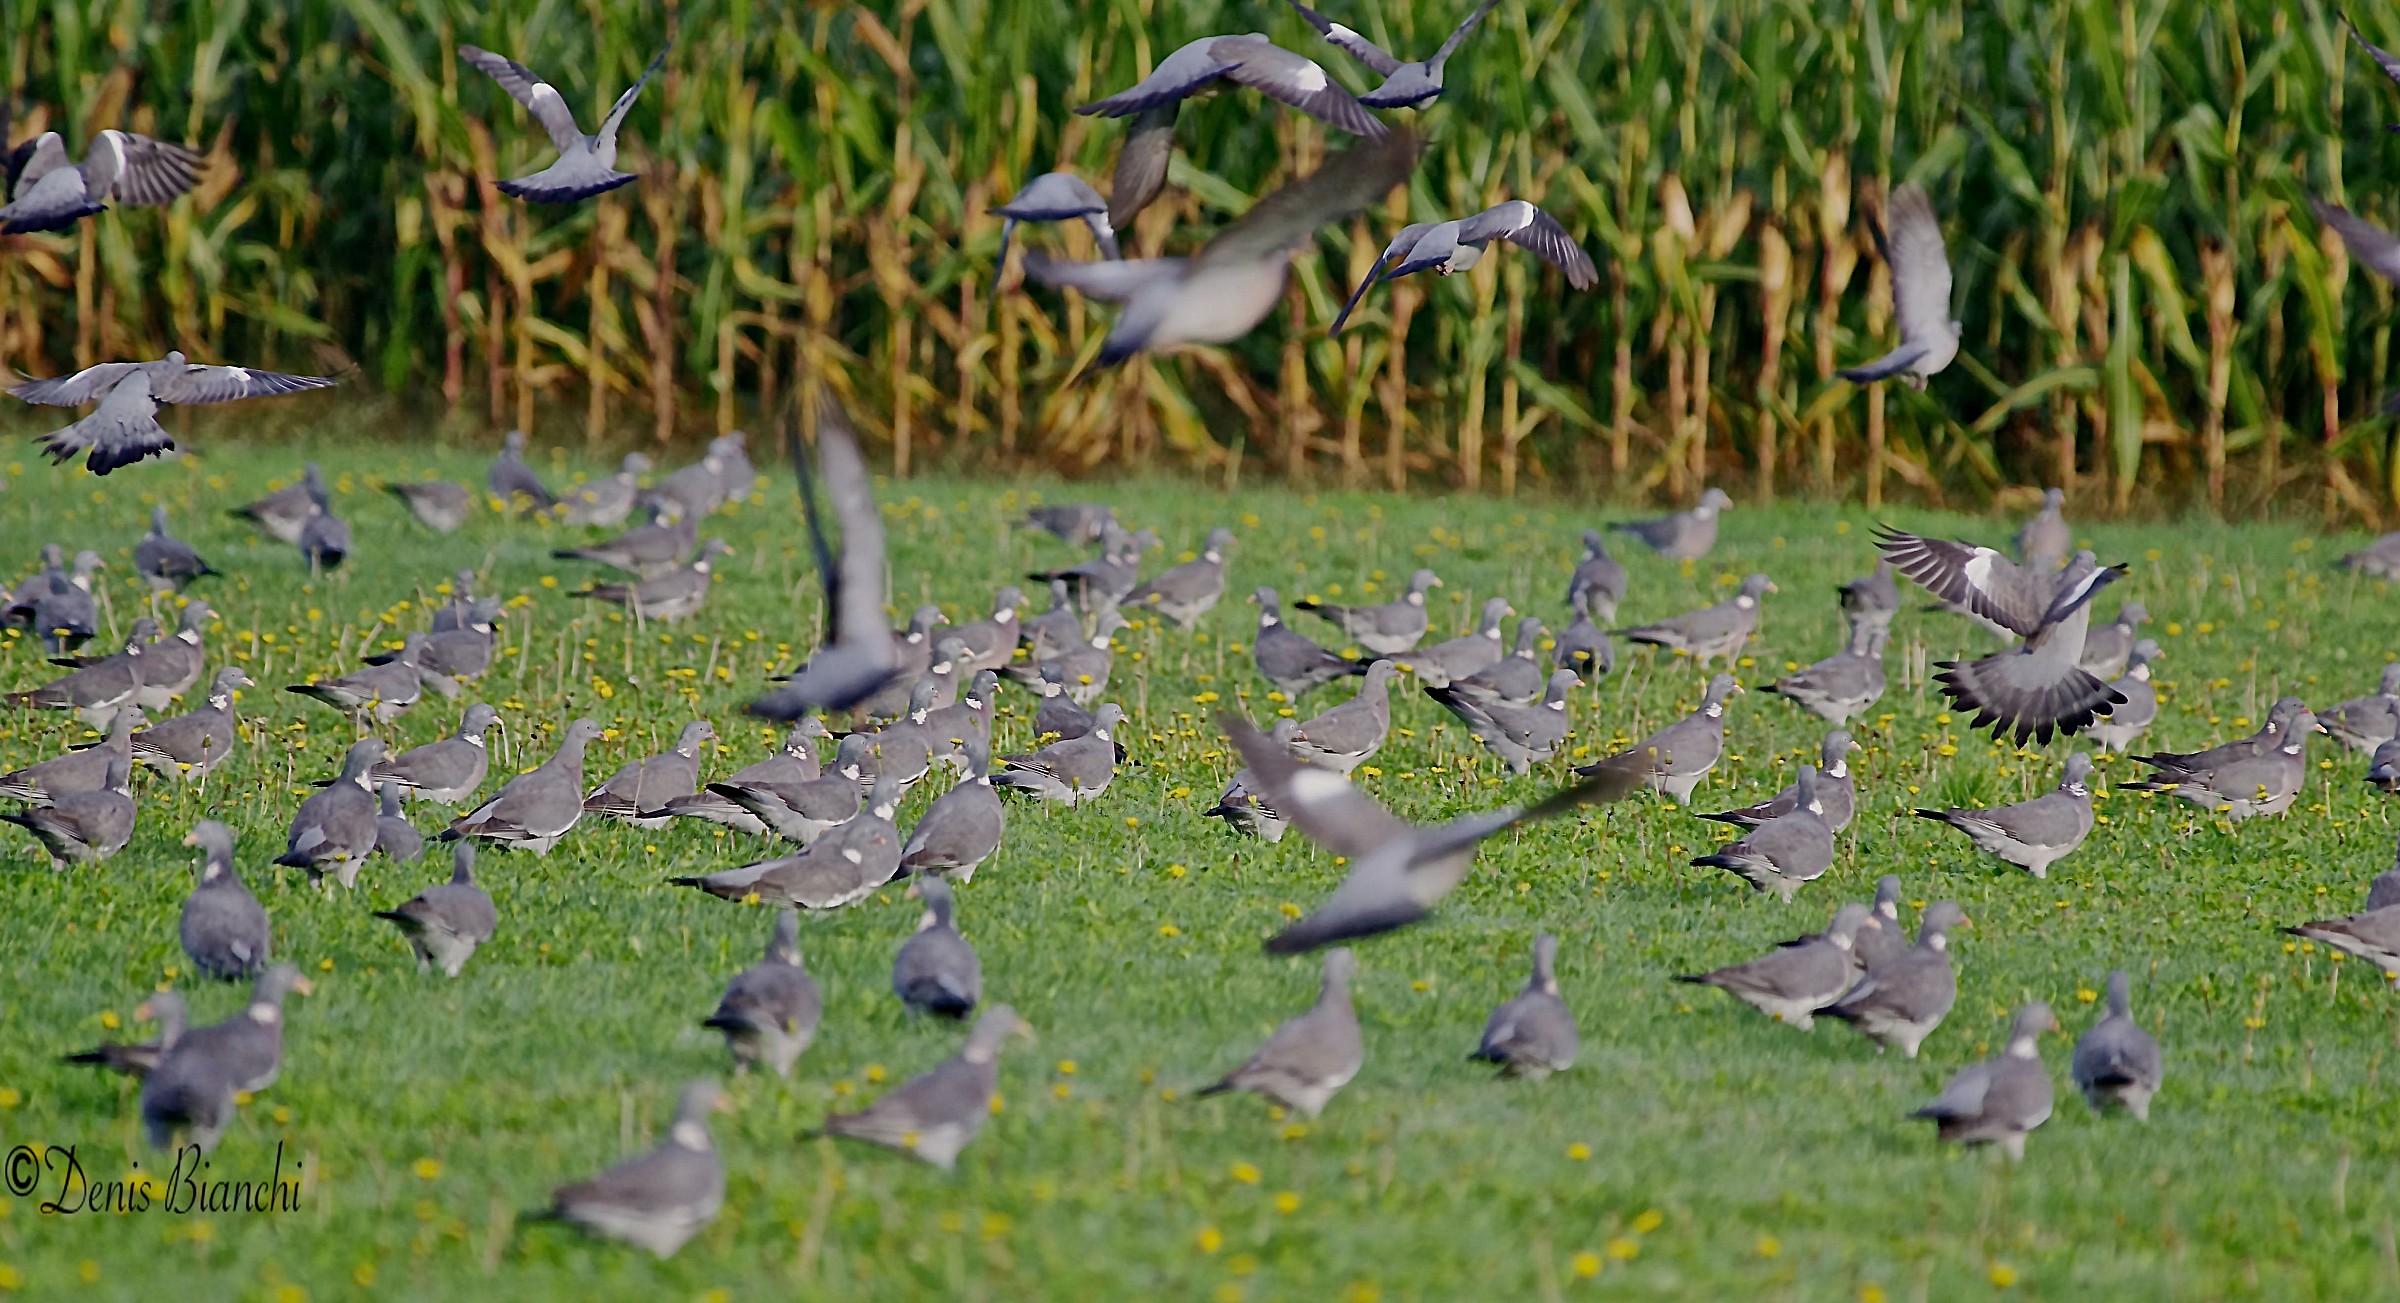 Pigeons in the meadows...